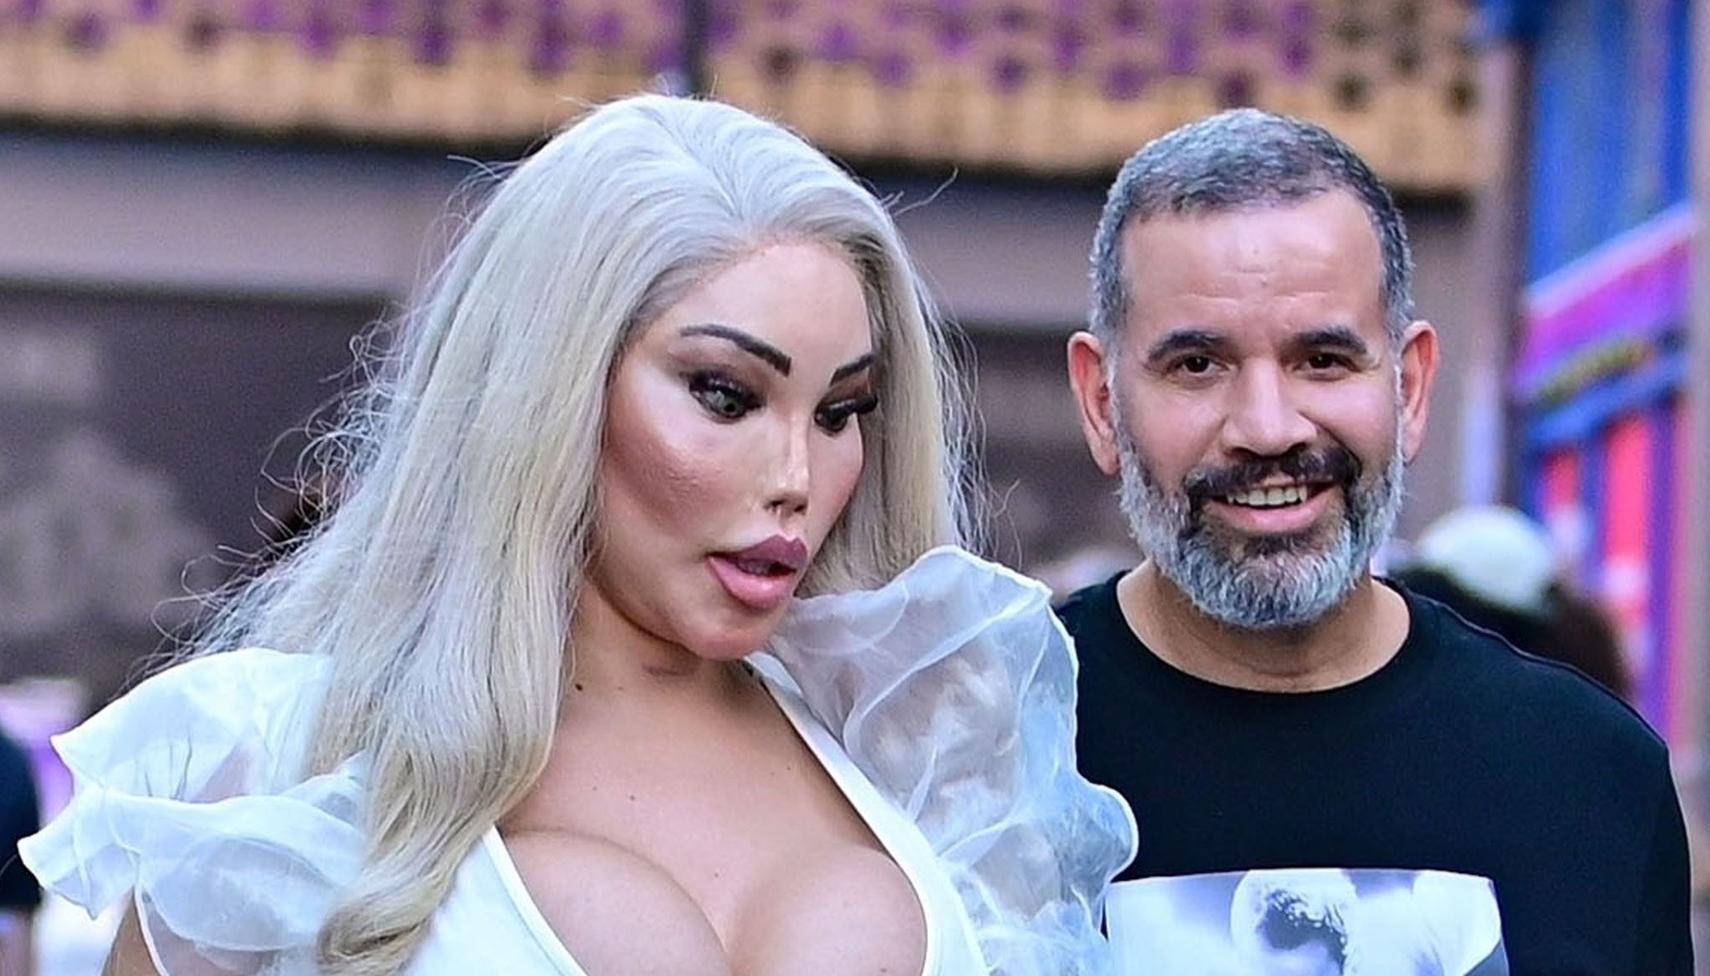 *EXCLUSIVE* Showing off her latest face lift, the Reality Star Jessica Alves showing a whole load of cleavage seen arm in arm with a mystery man in London's Soho.